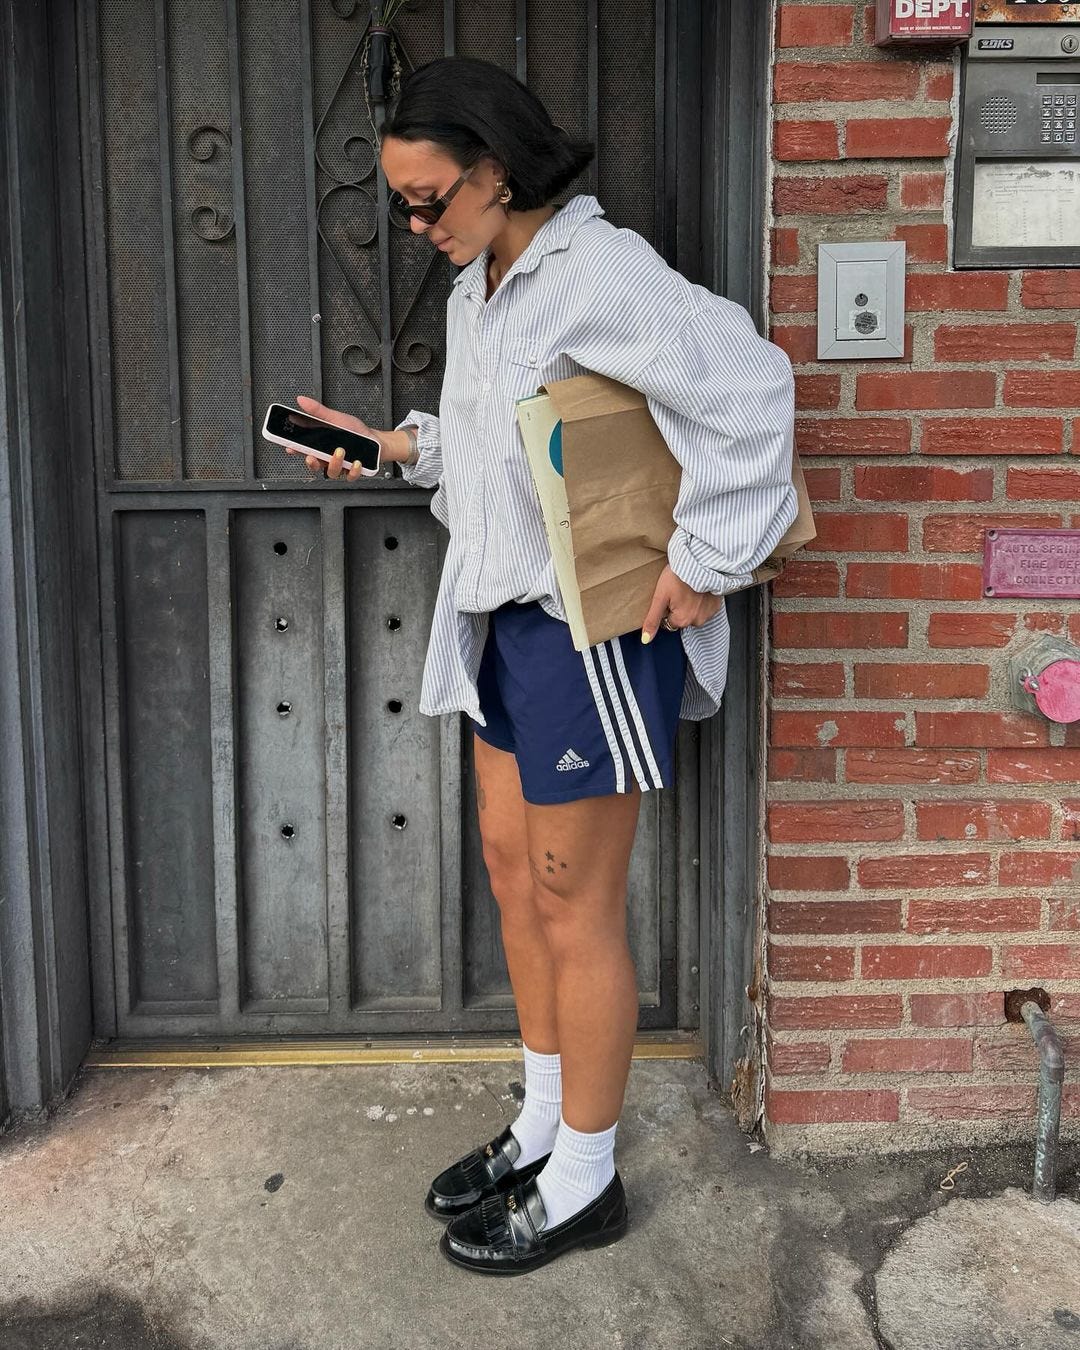 woman standing in a doorway wearing a button down shirt, blue adidas shorts, white socks, and dark loafers